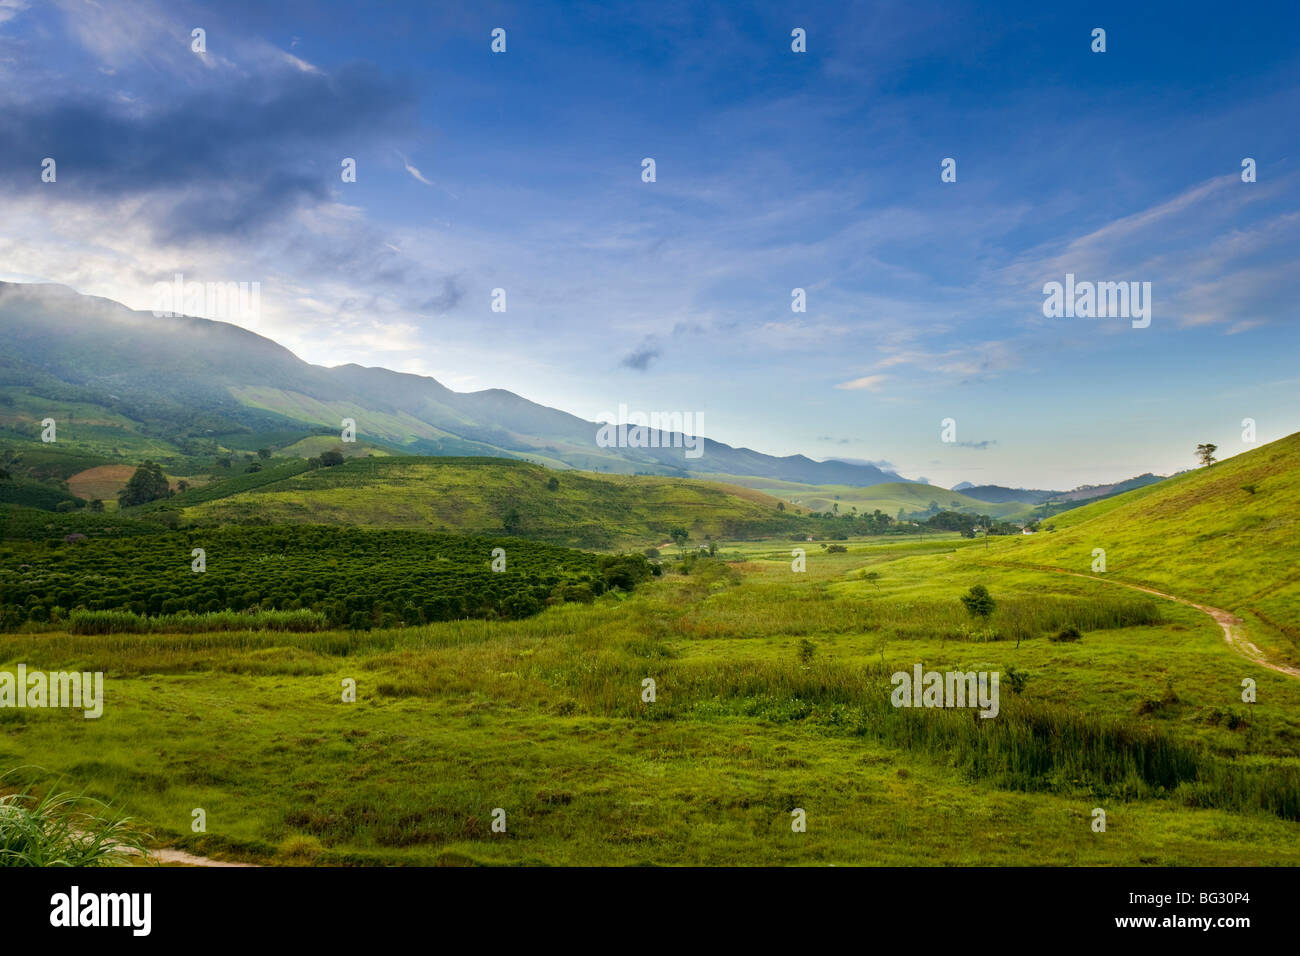 A view to the Caparao Sierra located in Minas Gerais, Brazil. Stock Photo